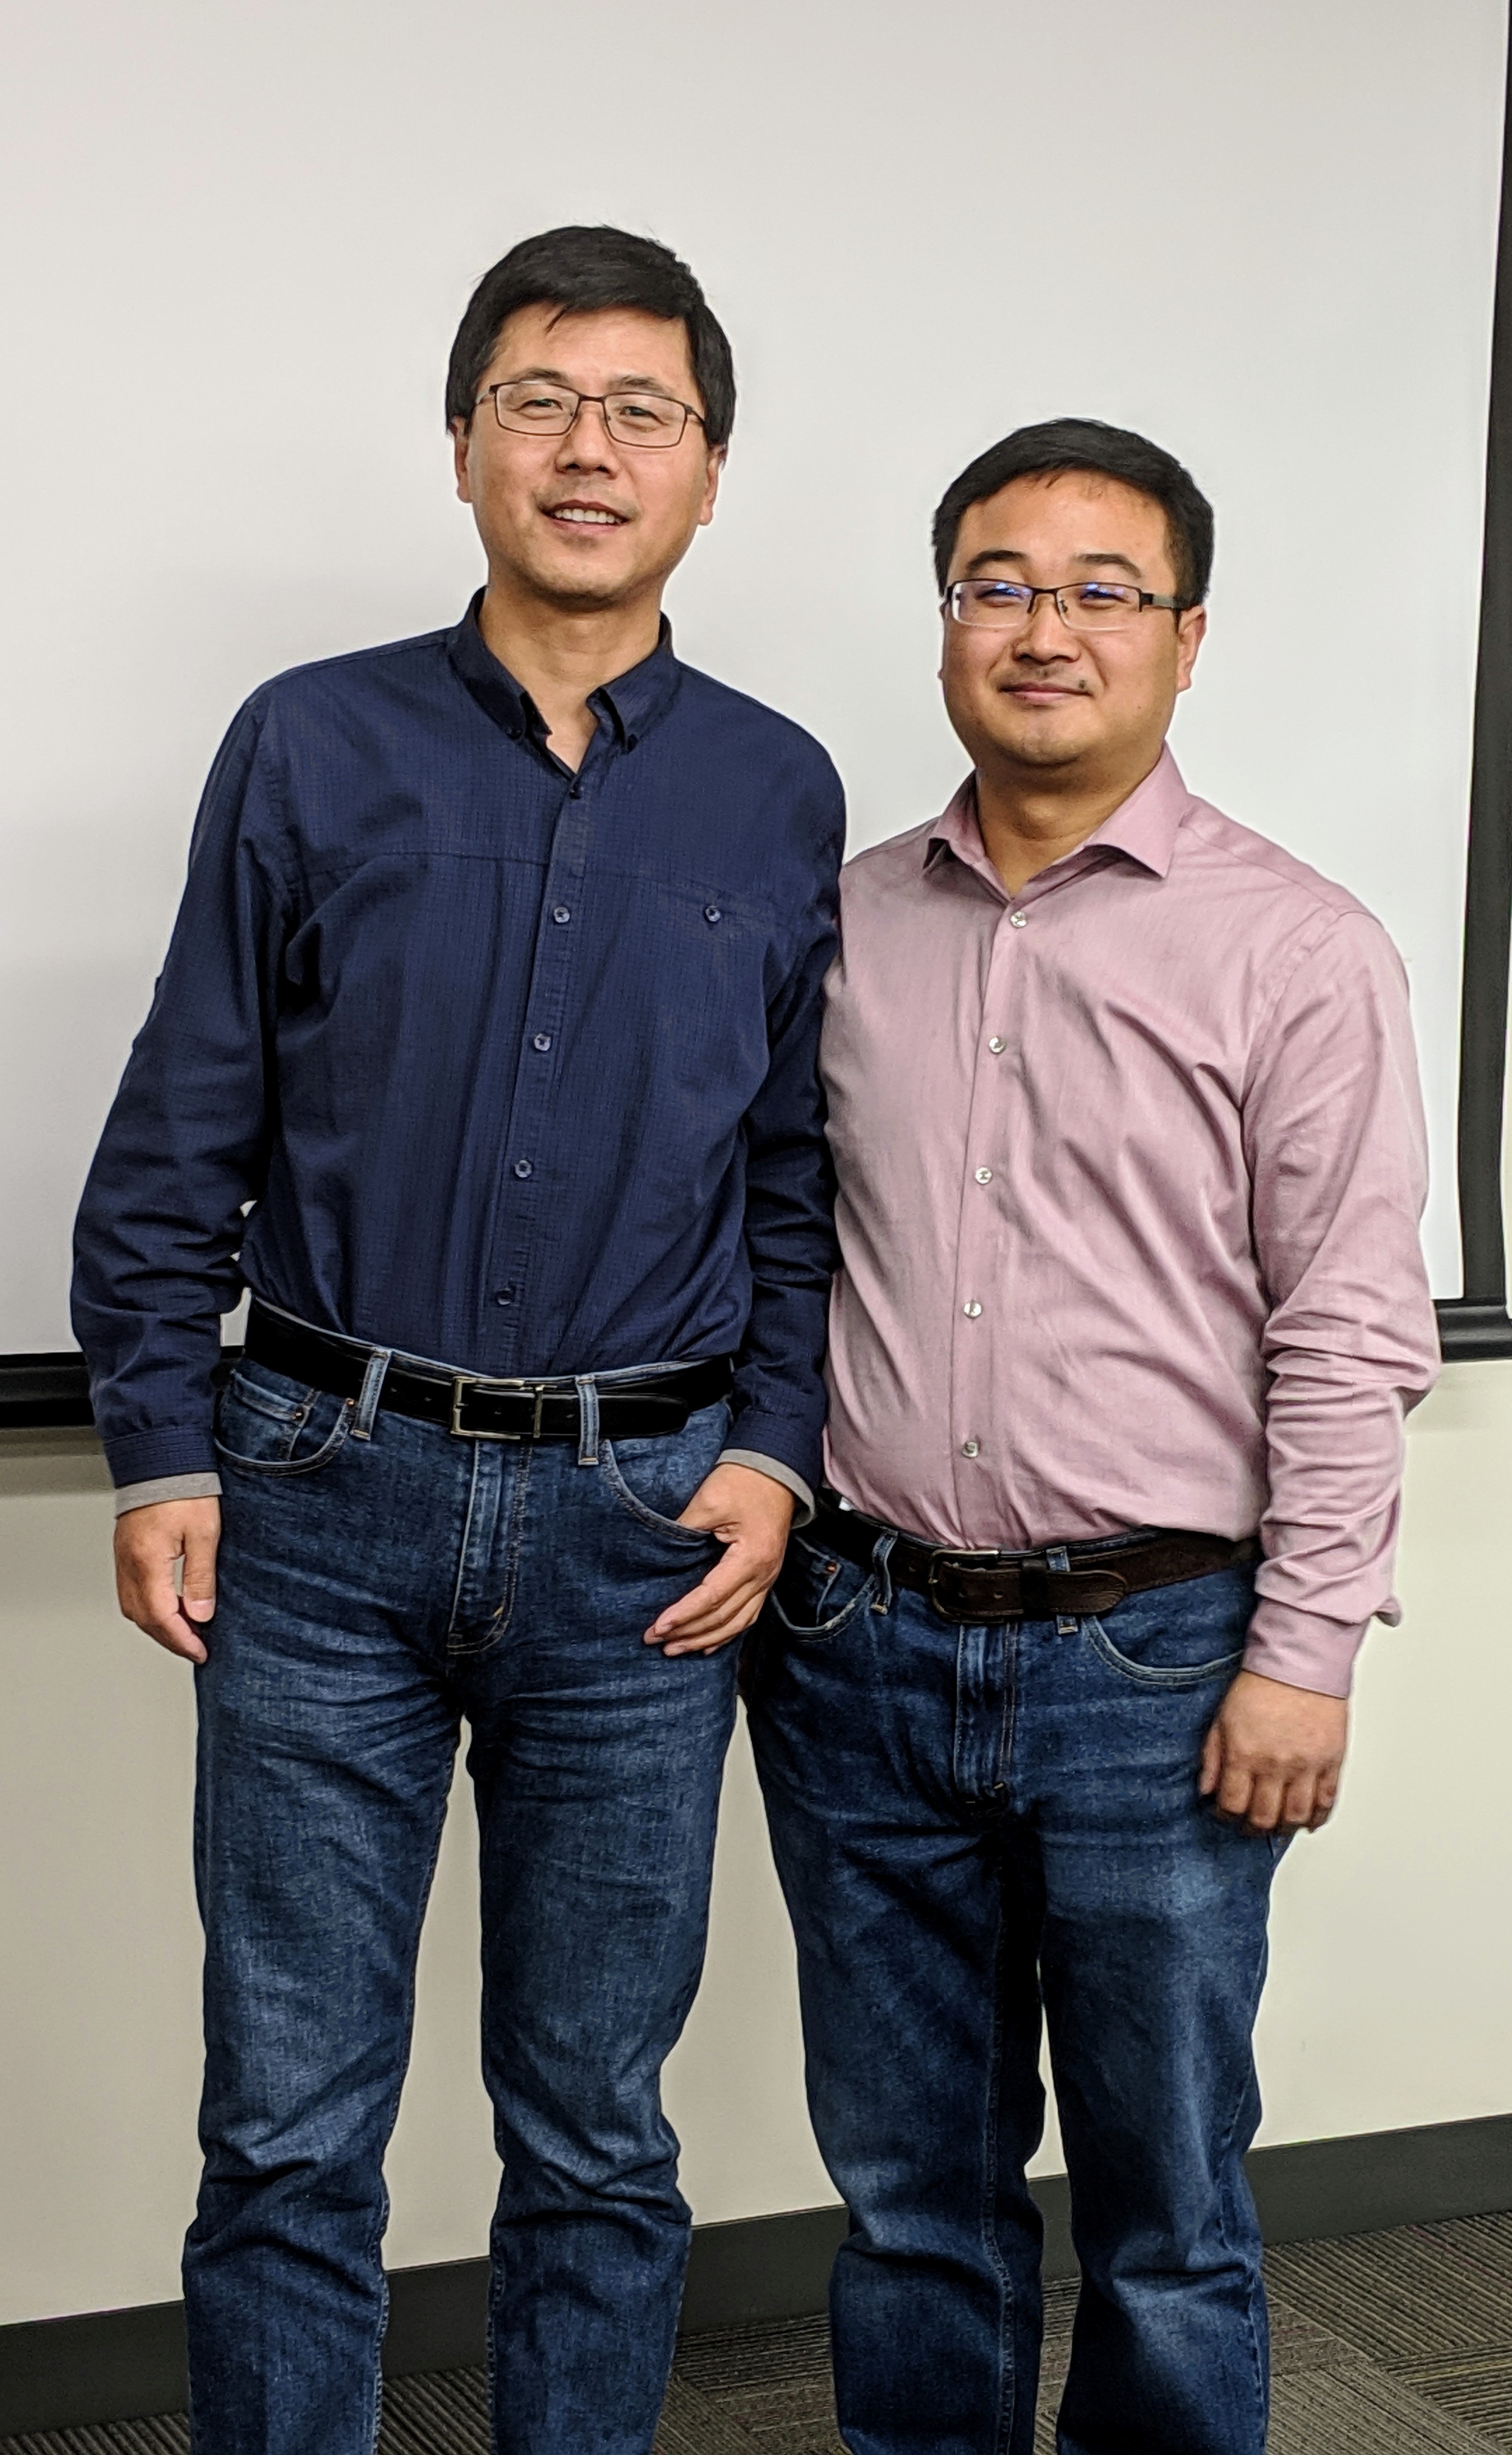 Dr. Li stands with his mentor, Dr. Xinqi Chen.